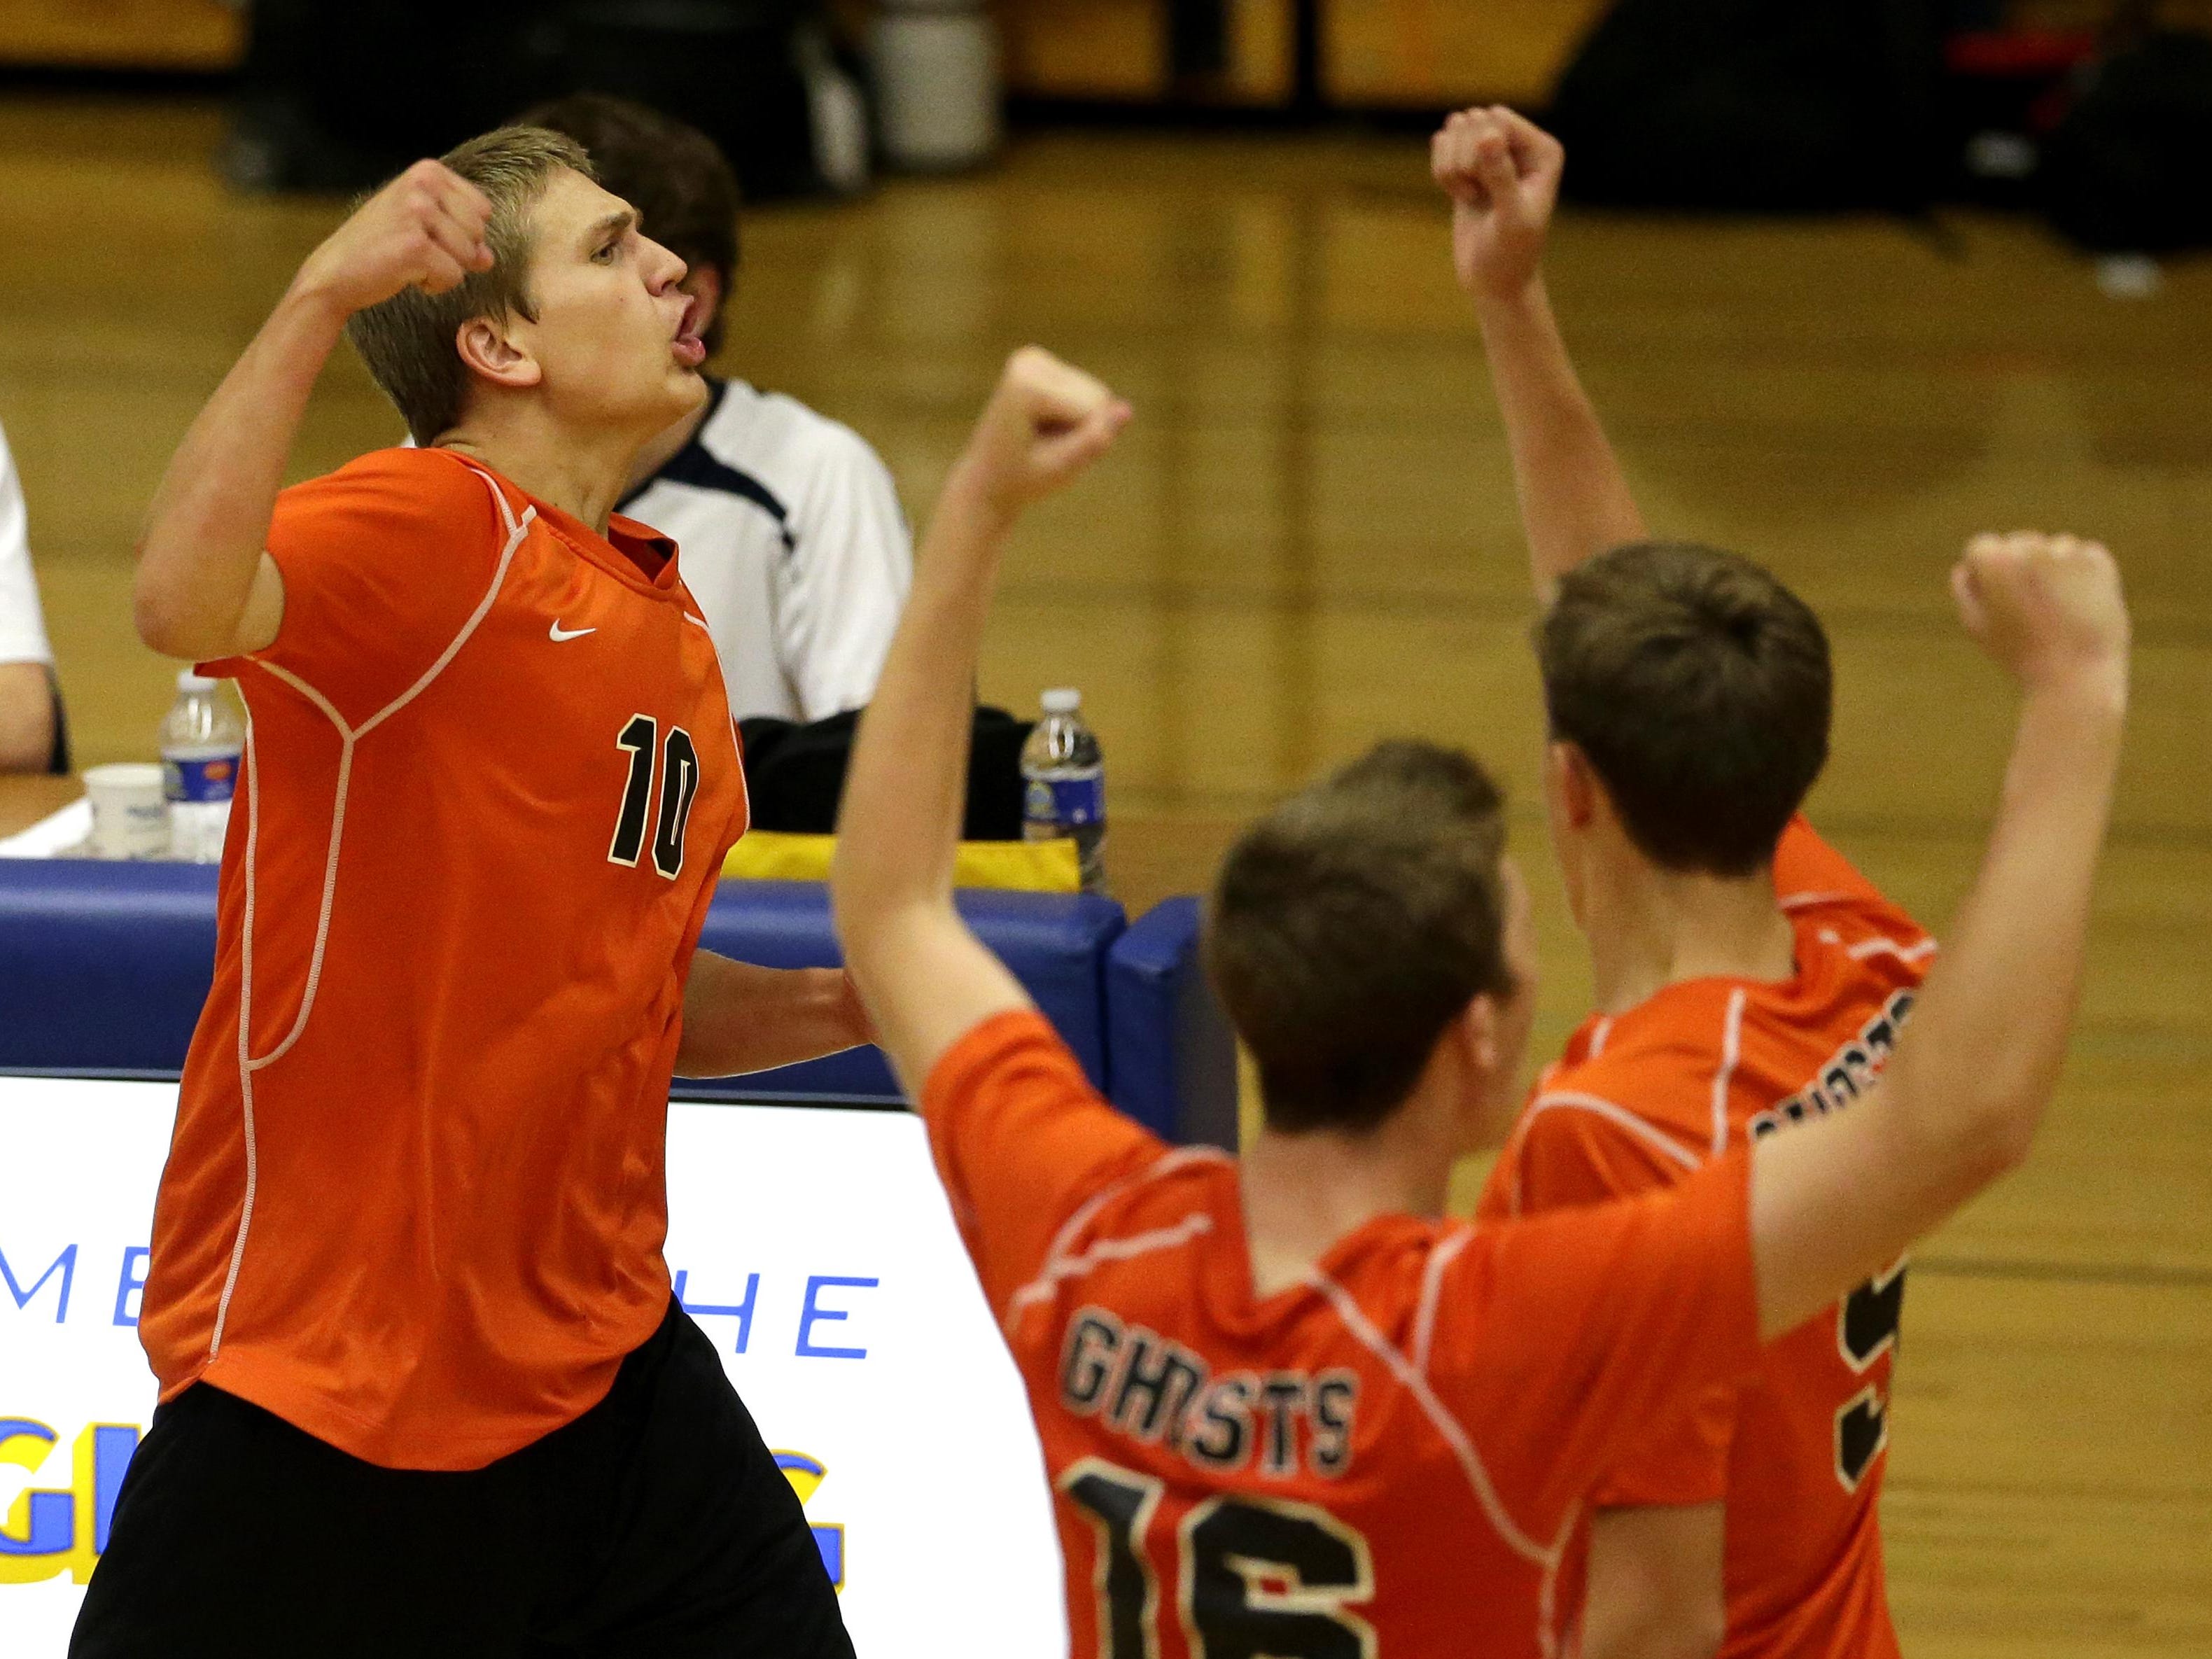 Kaukauna’s Zach Schmidt (left) celebrates with teammates after the Ghosts beat Appleton North in five sets Tuesday at North.